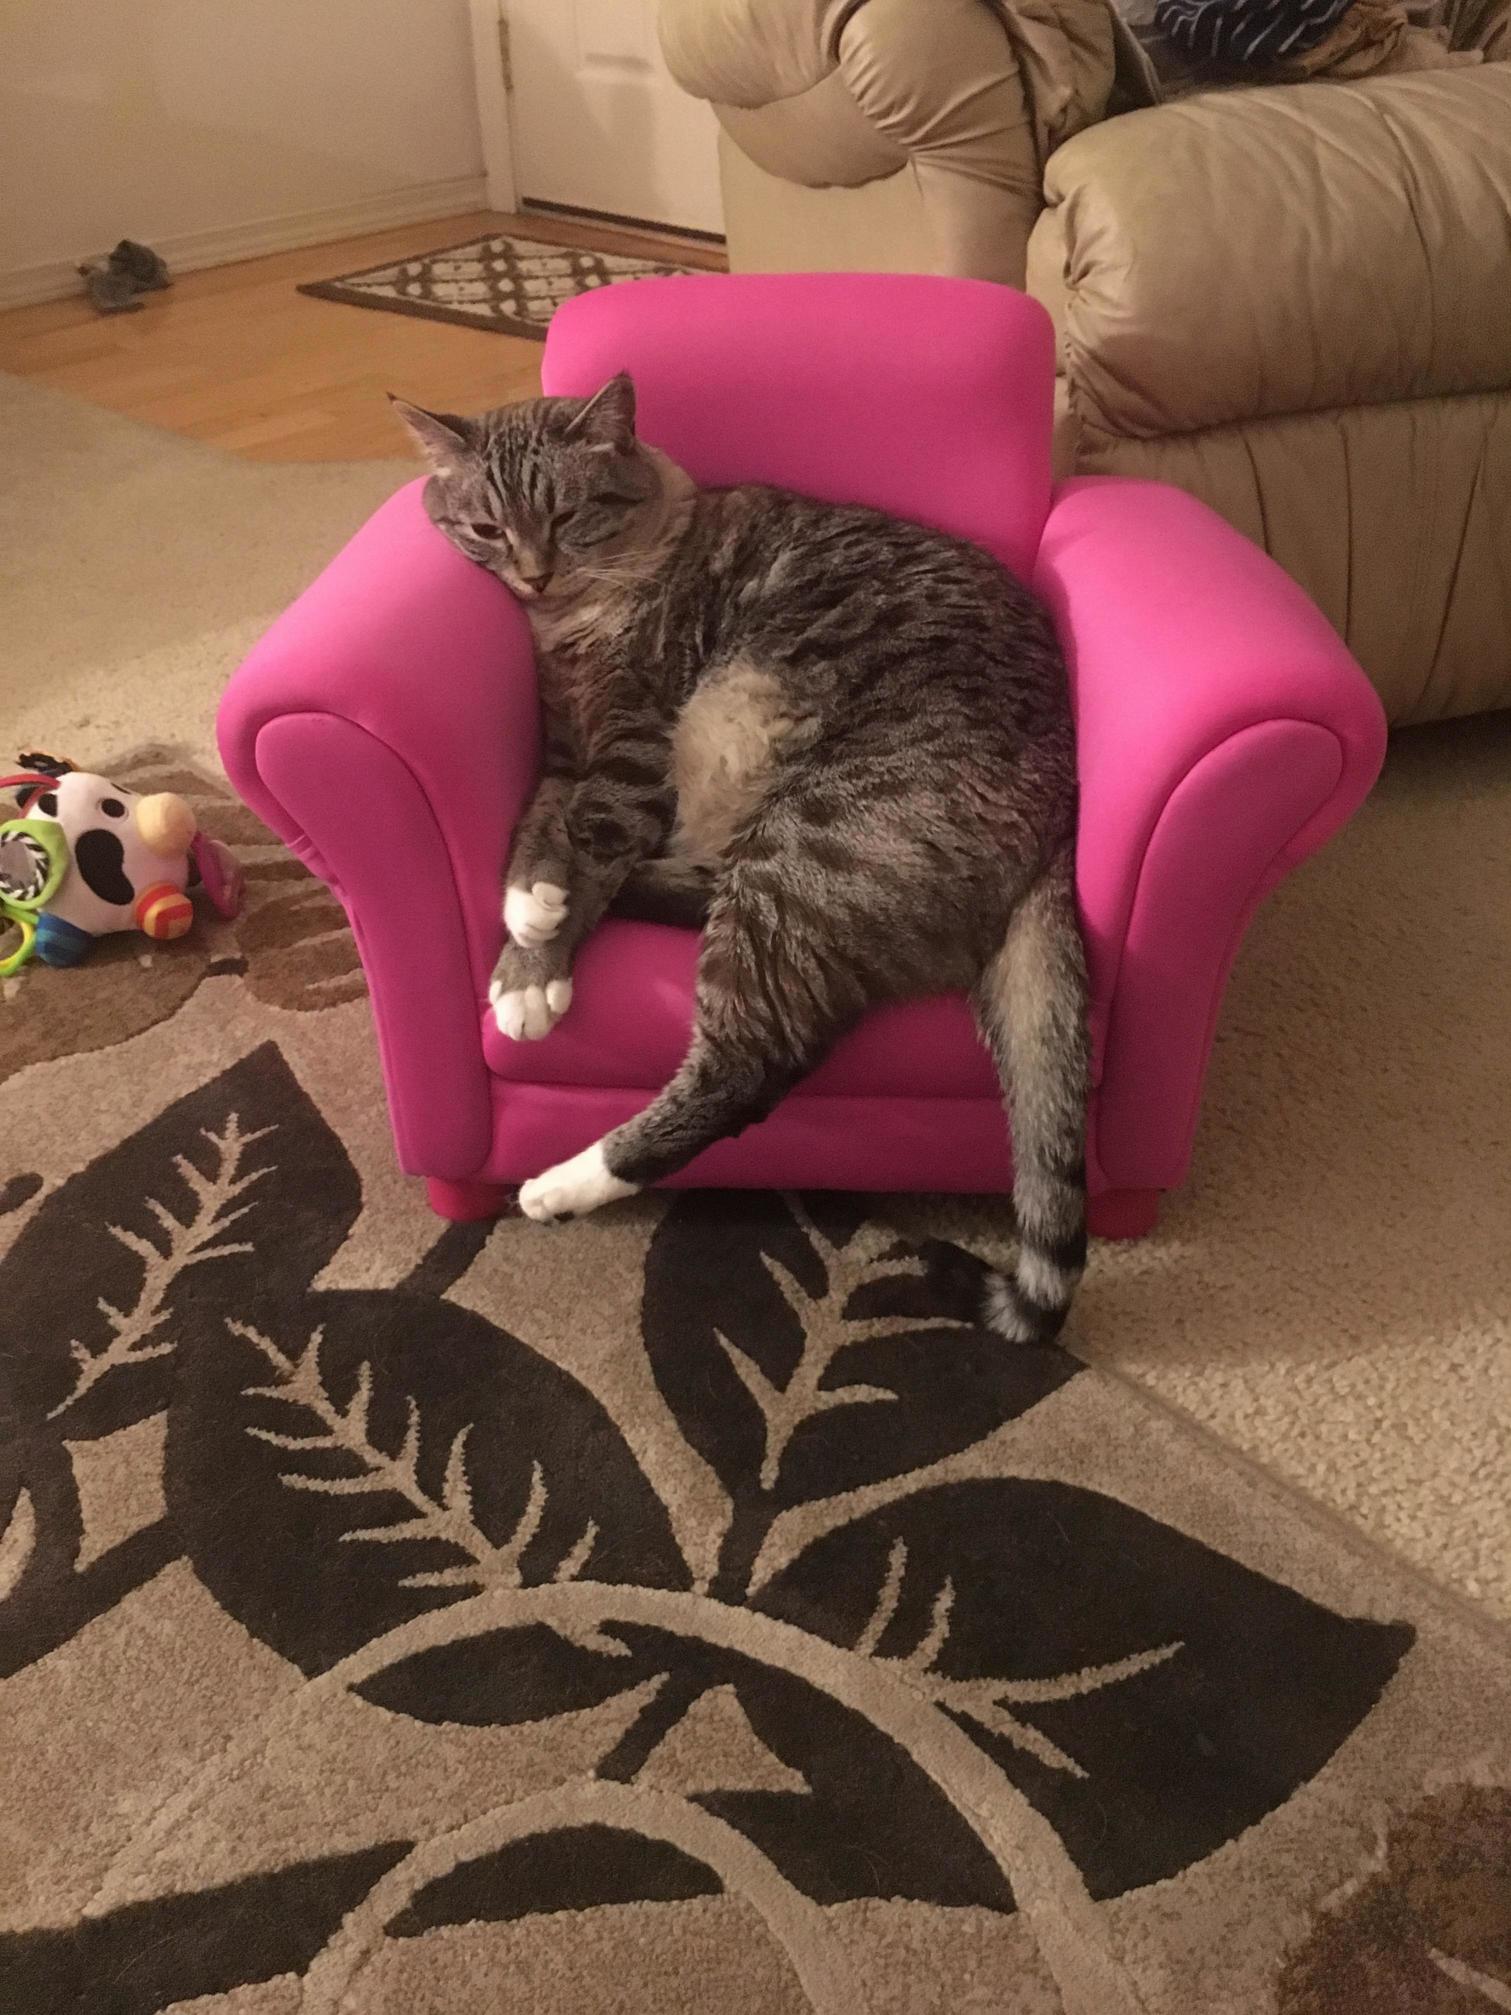 Wife bought a new chair for our daughter…